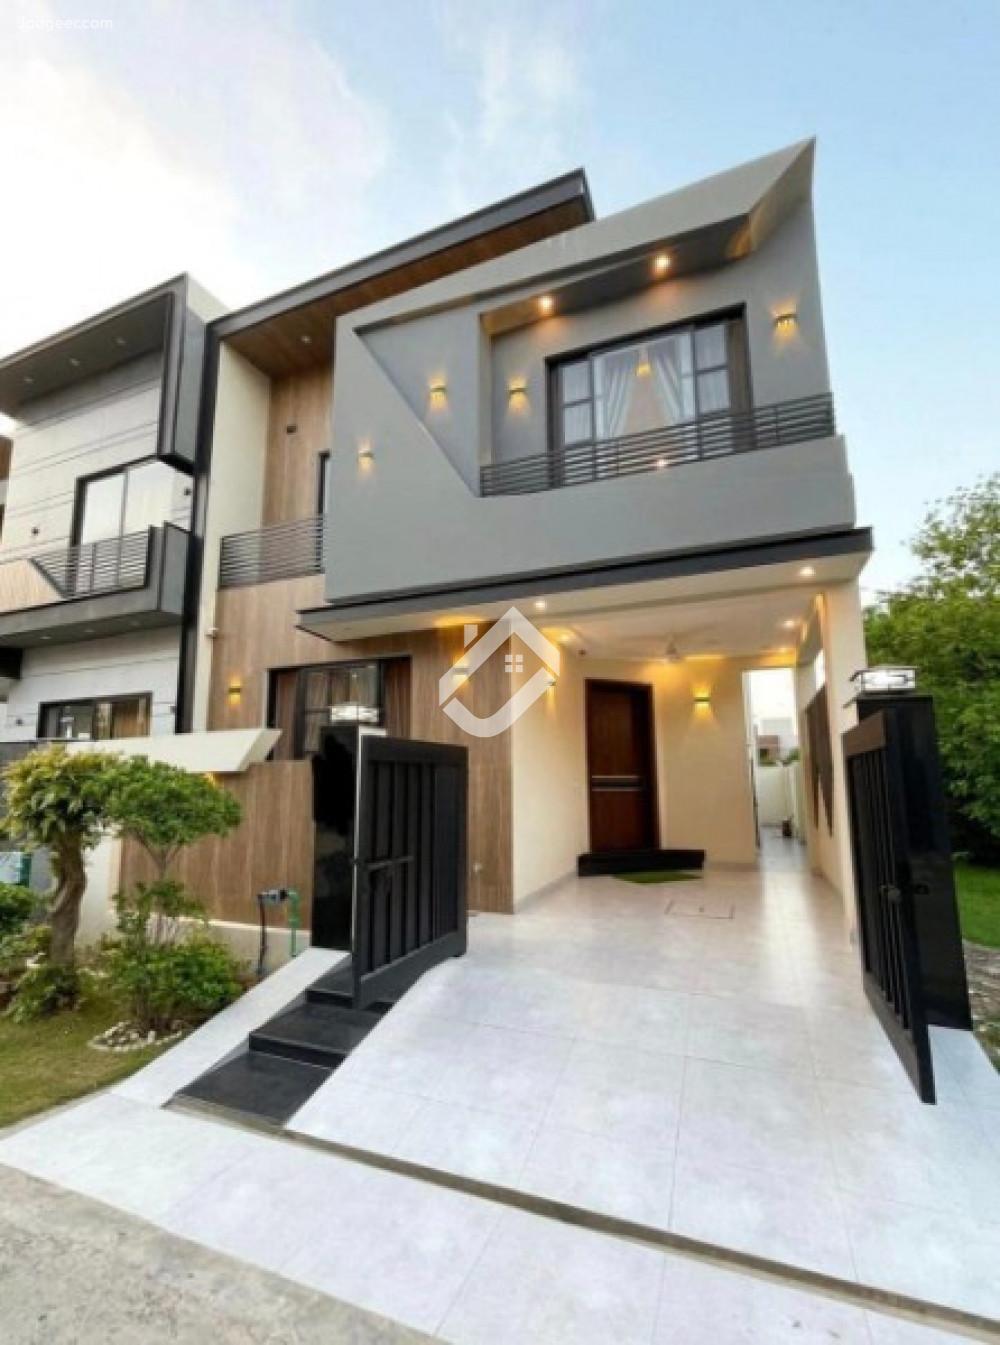 5 Marla House For Sale In DHA Phase 9 in DHA Phase 9, Lahore